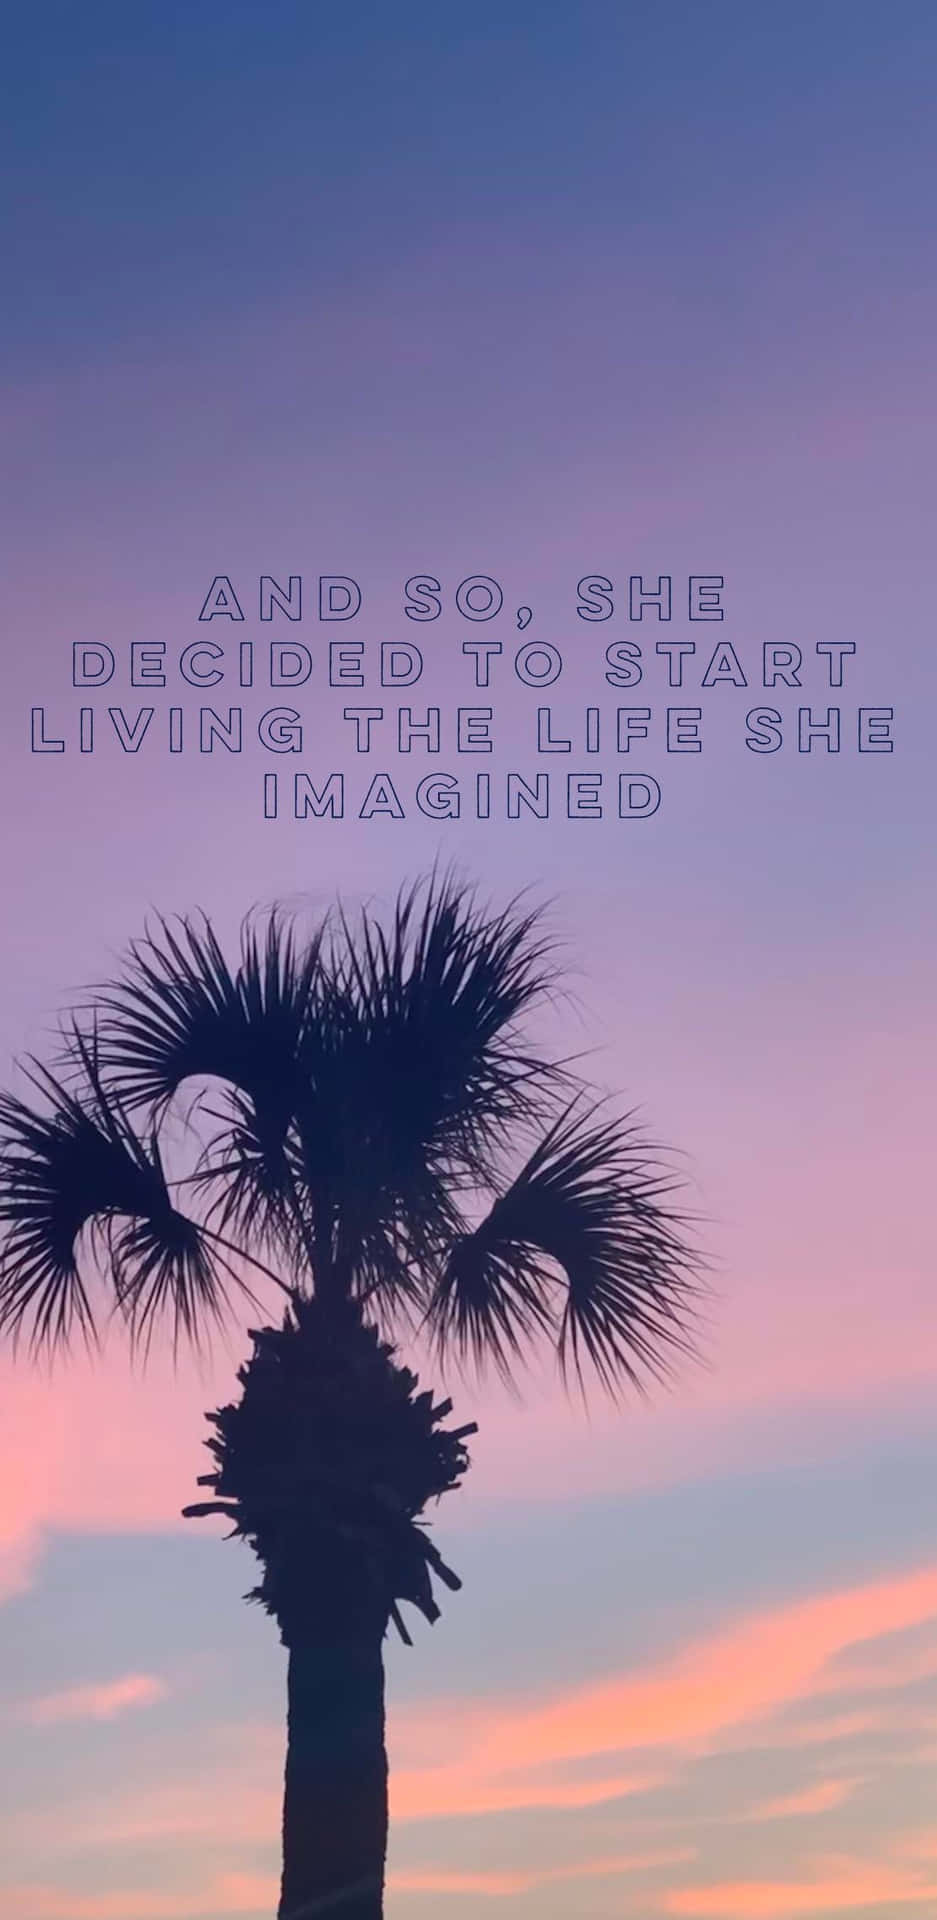 A Palm Tree With The Quote And The Determined To Start Living The Life They Imagine Wallpaper